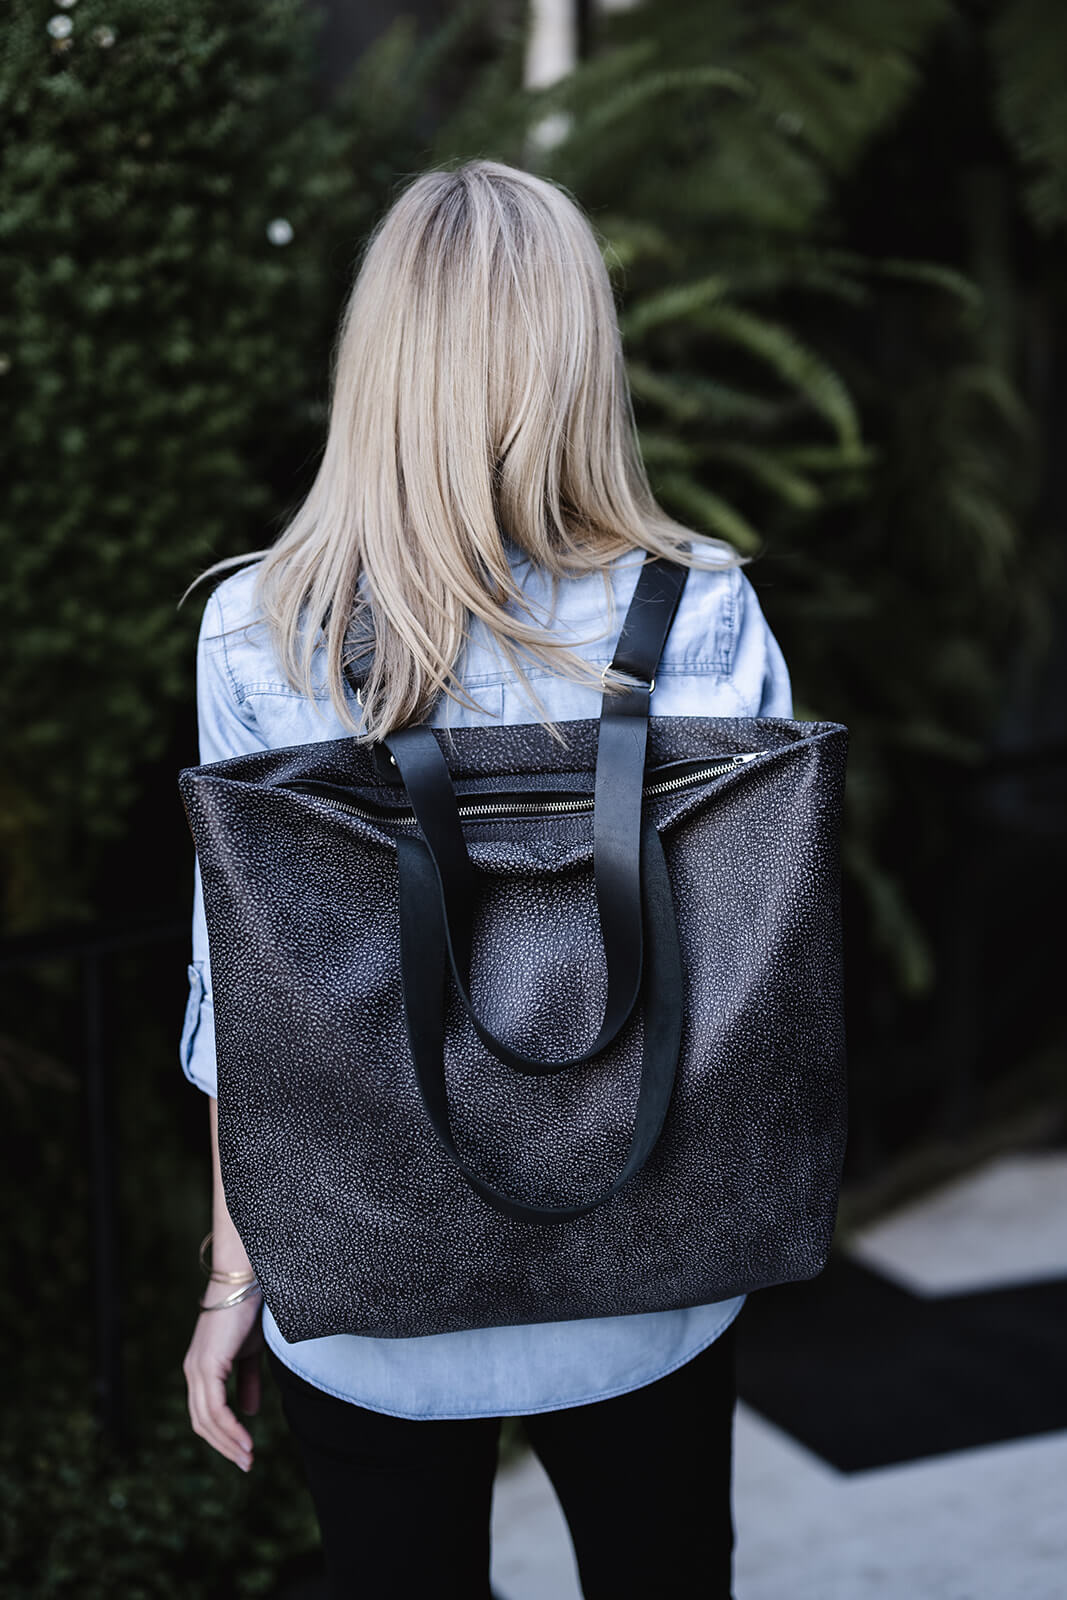 Woman standing in front of greenery and with back to camera. Blonde long hair, light denim shirt and black pants. She is modelling the Ella Jackson Two-tone Grey Leather Backpack & Tote. The bag is being worn as a backpack with black straps, silver hardware and black and silver zip. 